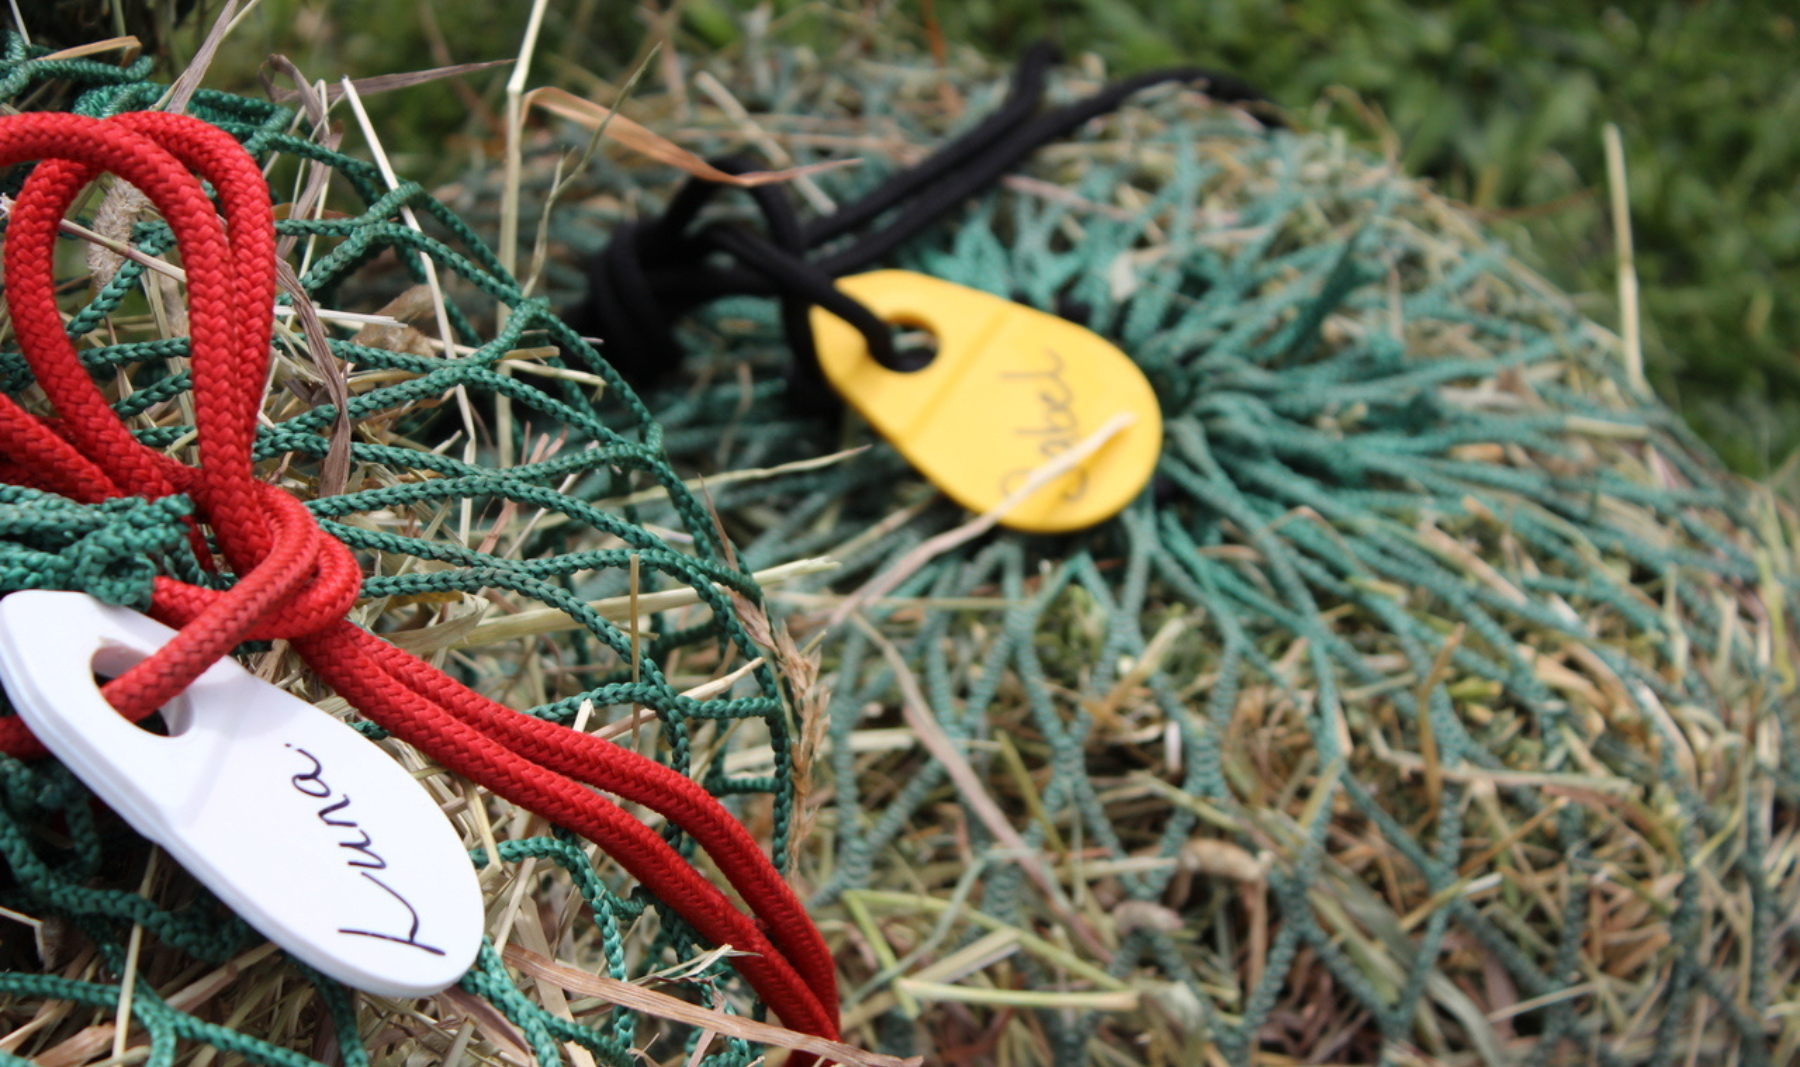 two green hay nets with name tags on the ropes